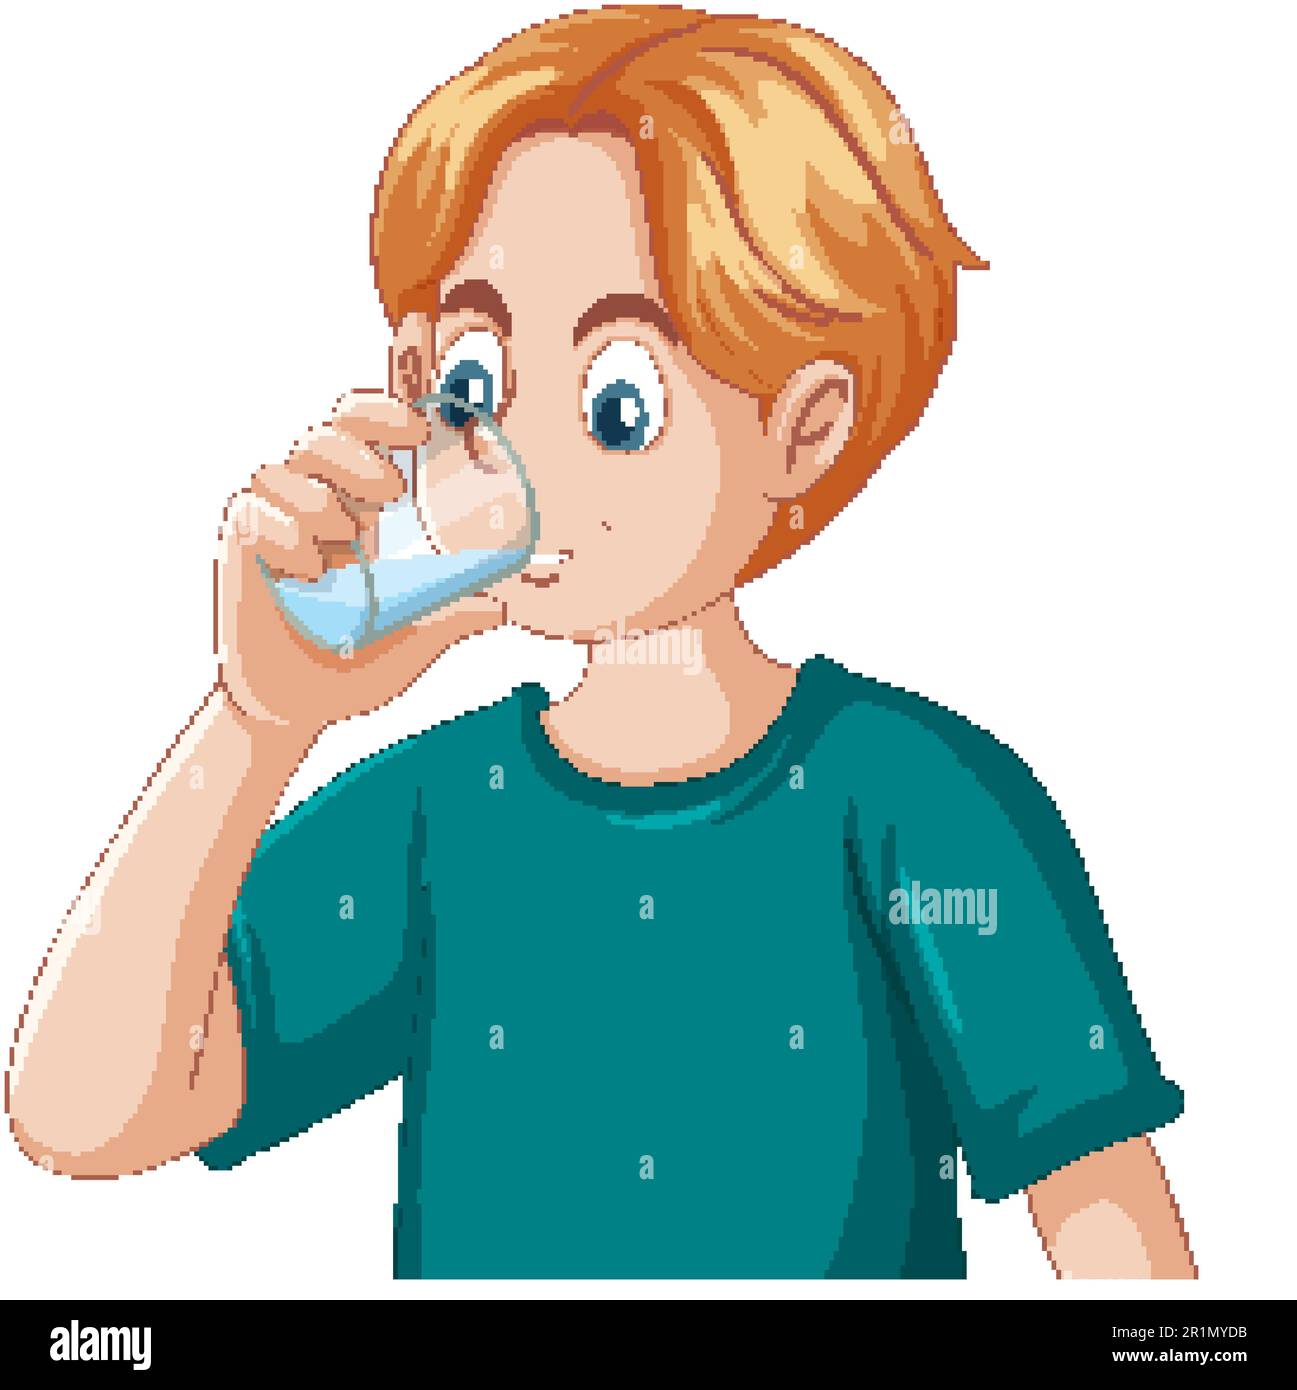 Teenage Boy Drinking Water from Glass illustration Stock Vector